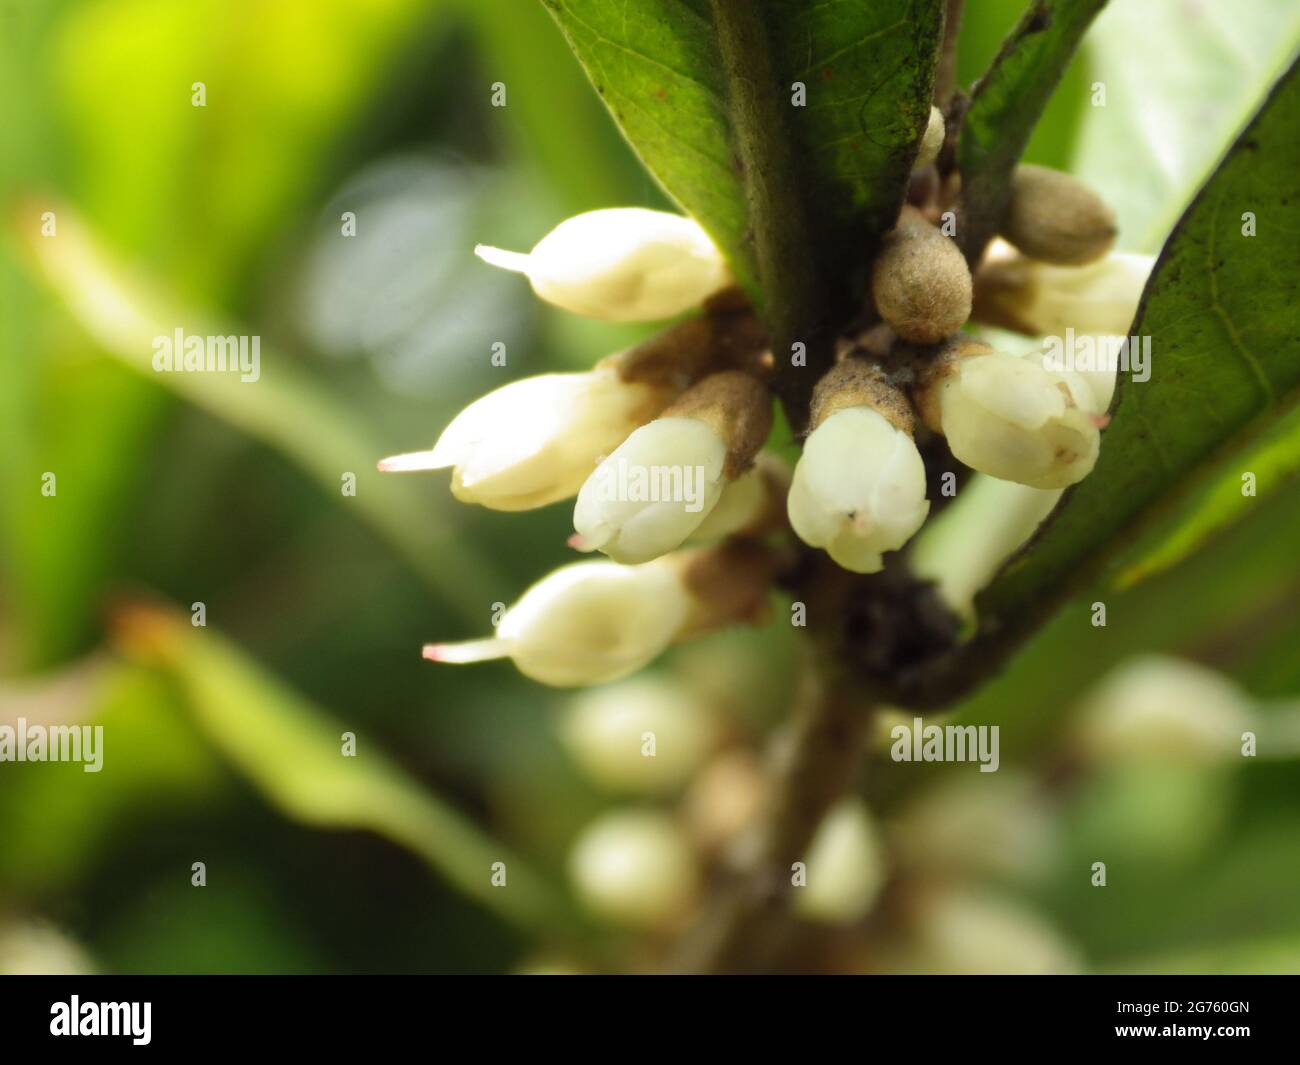 The white flower buds of a miracle fruit grown in the garden Stock Photo